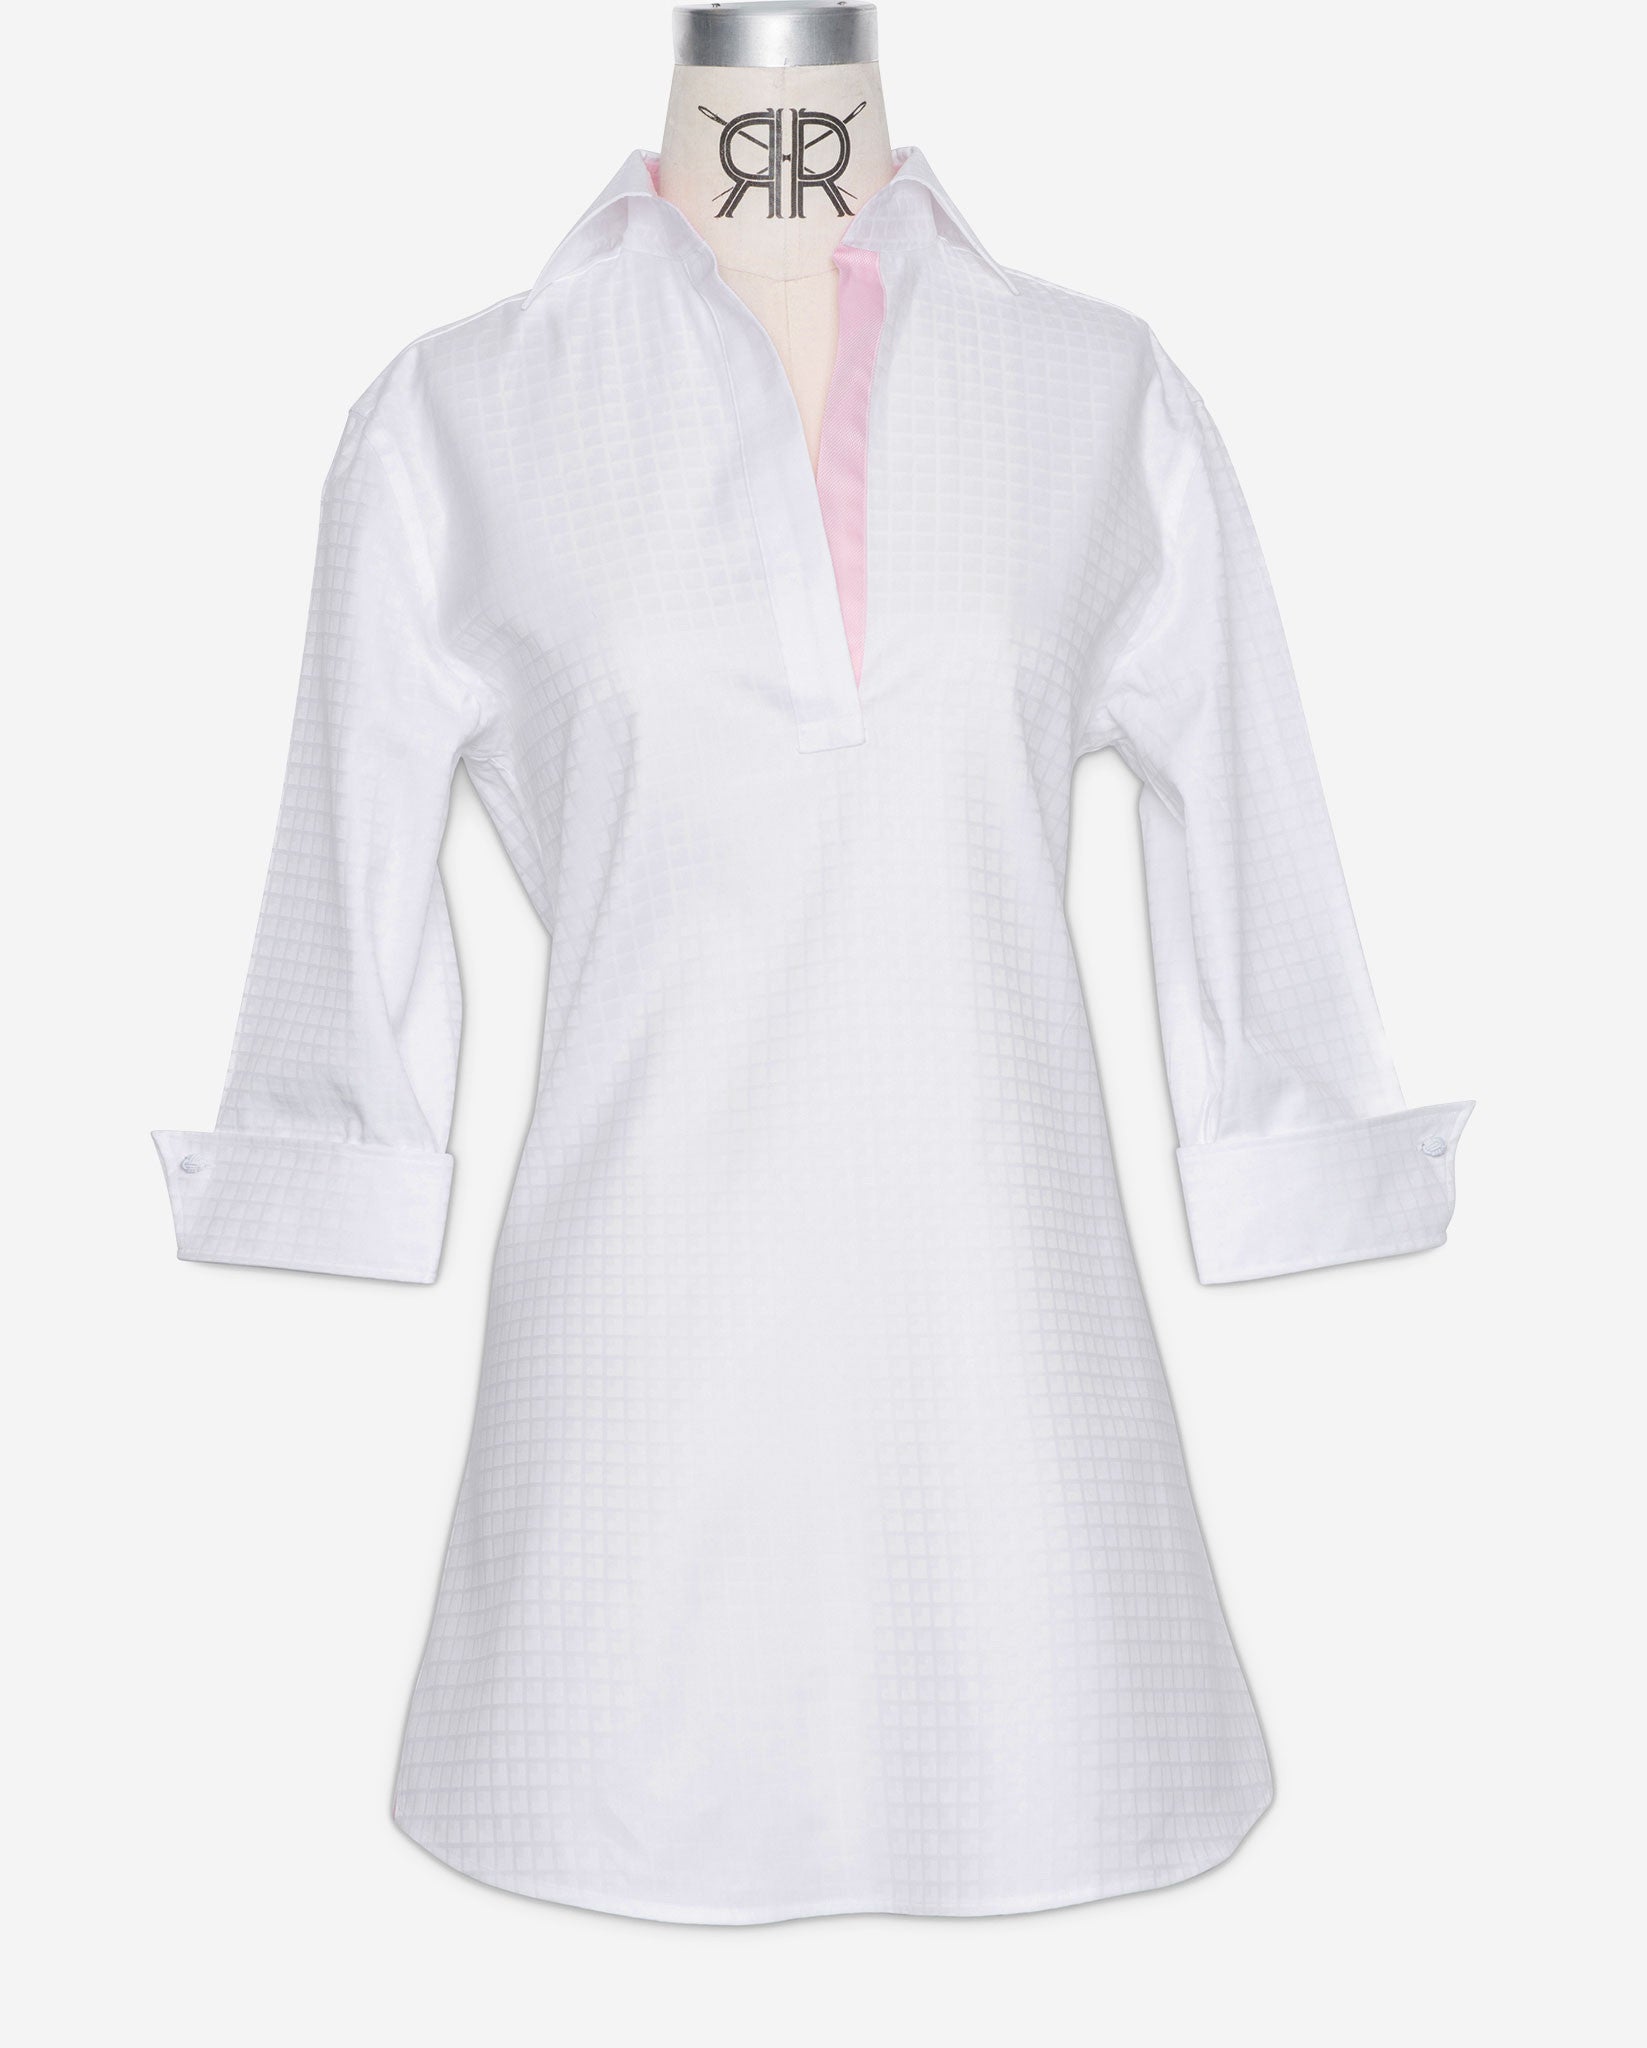 Tunic Shirt - White on White Check Women's Popover Blouse by Double R –  Double R Brand - Dallas